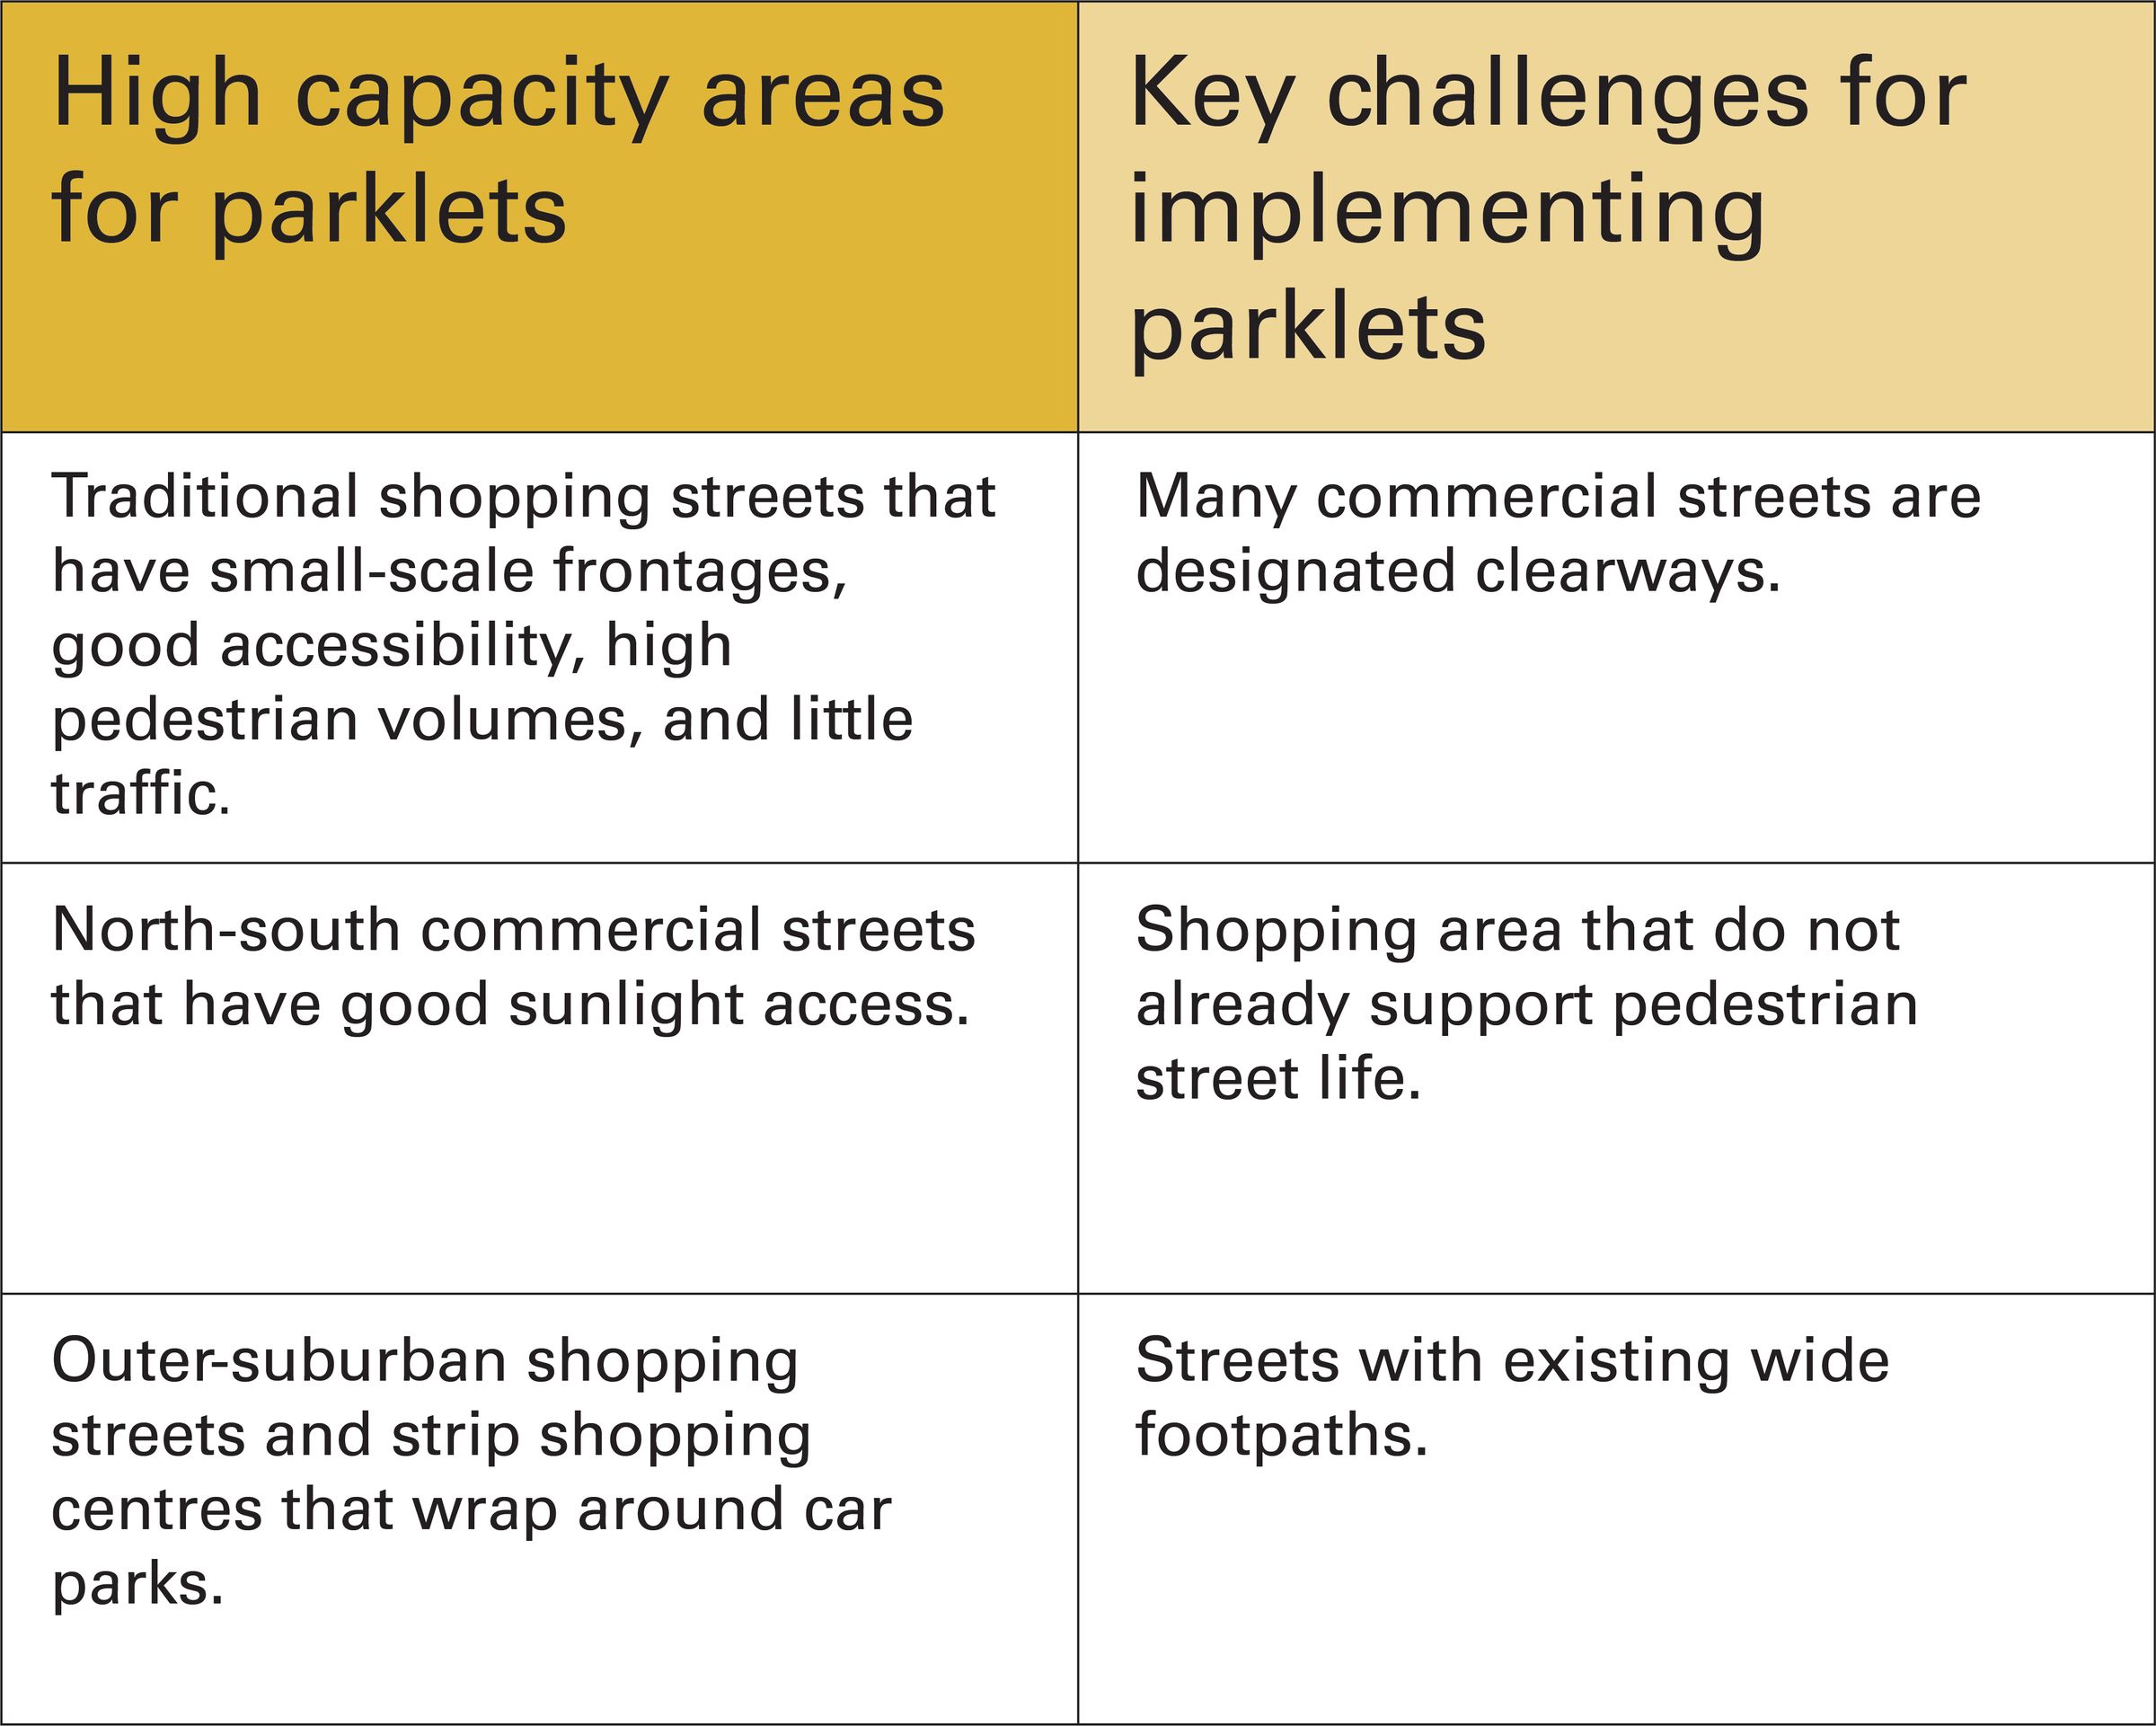 A table summarising showing a summary of the high capacity areas for parklets and key challenges for implementing parklets